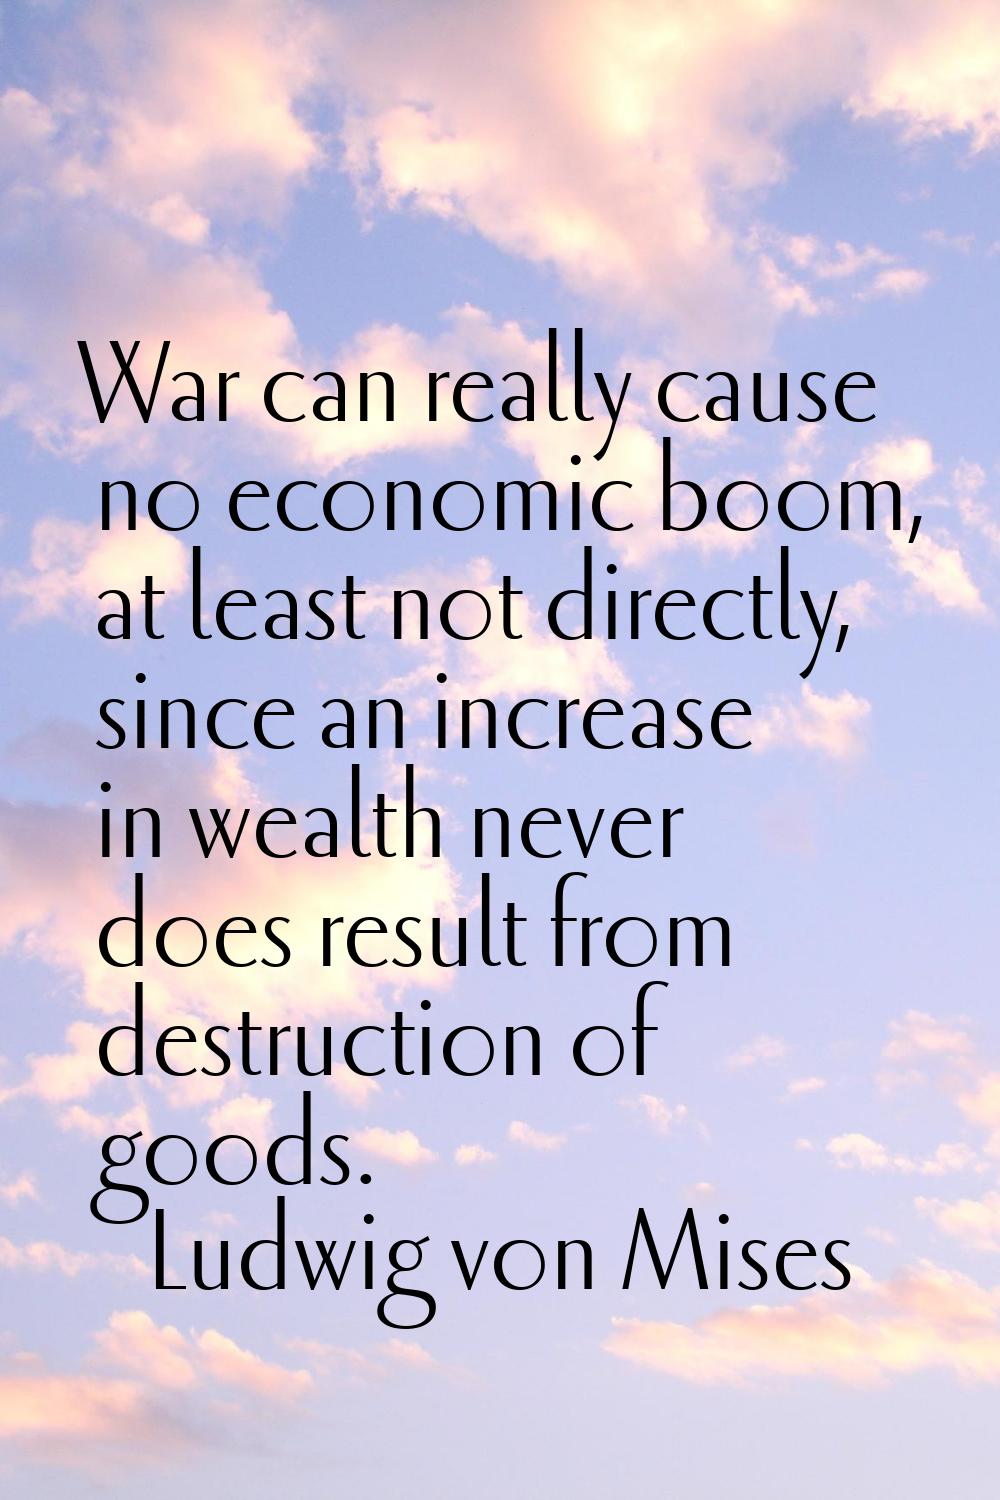 War can really cause no economic boom, at least not directly, since an increase in wealth never doe